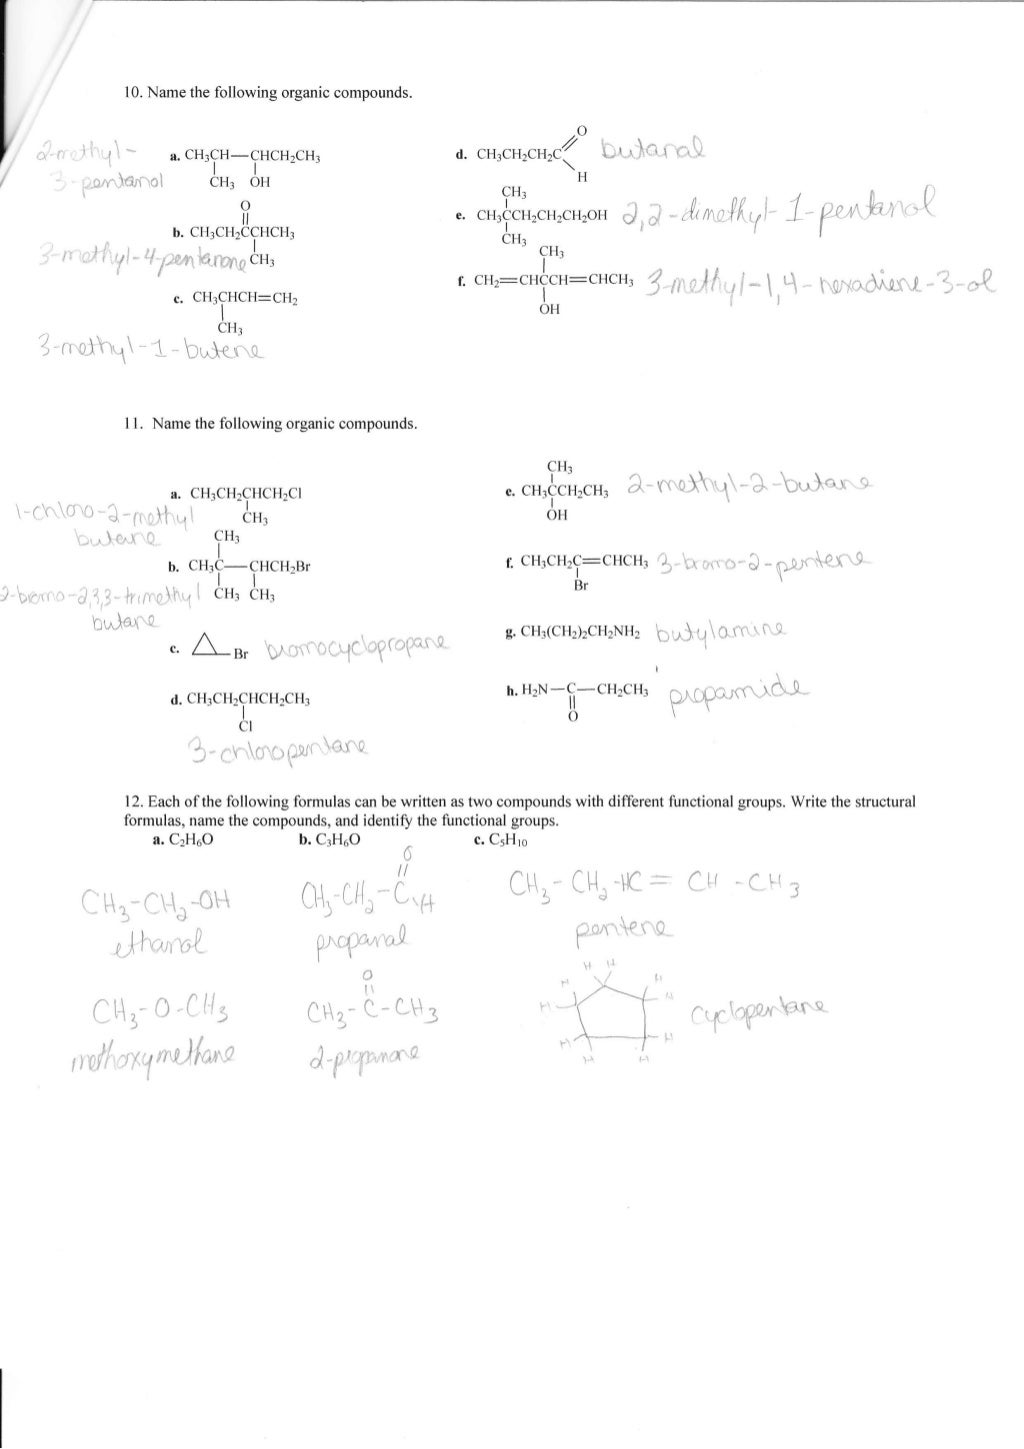 complete-organic-chemistry-worksheet-answers